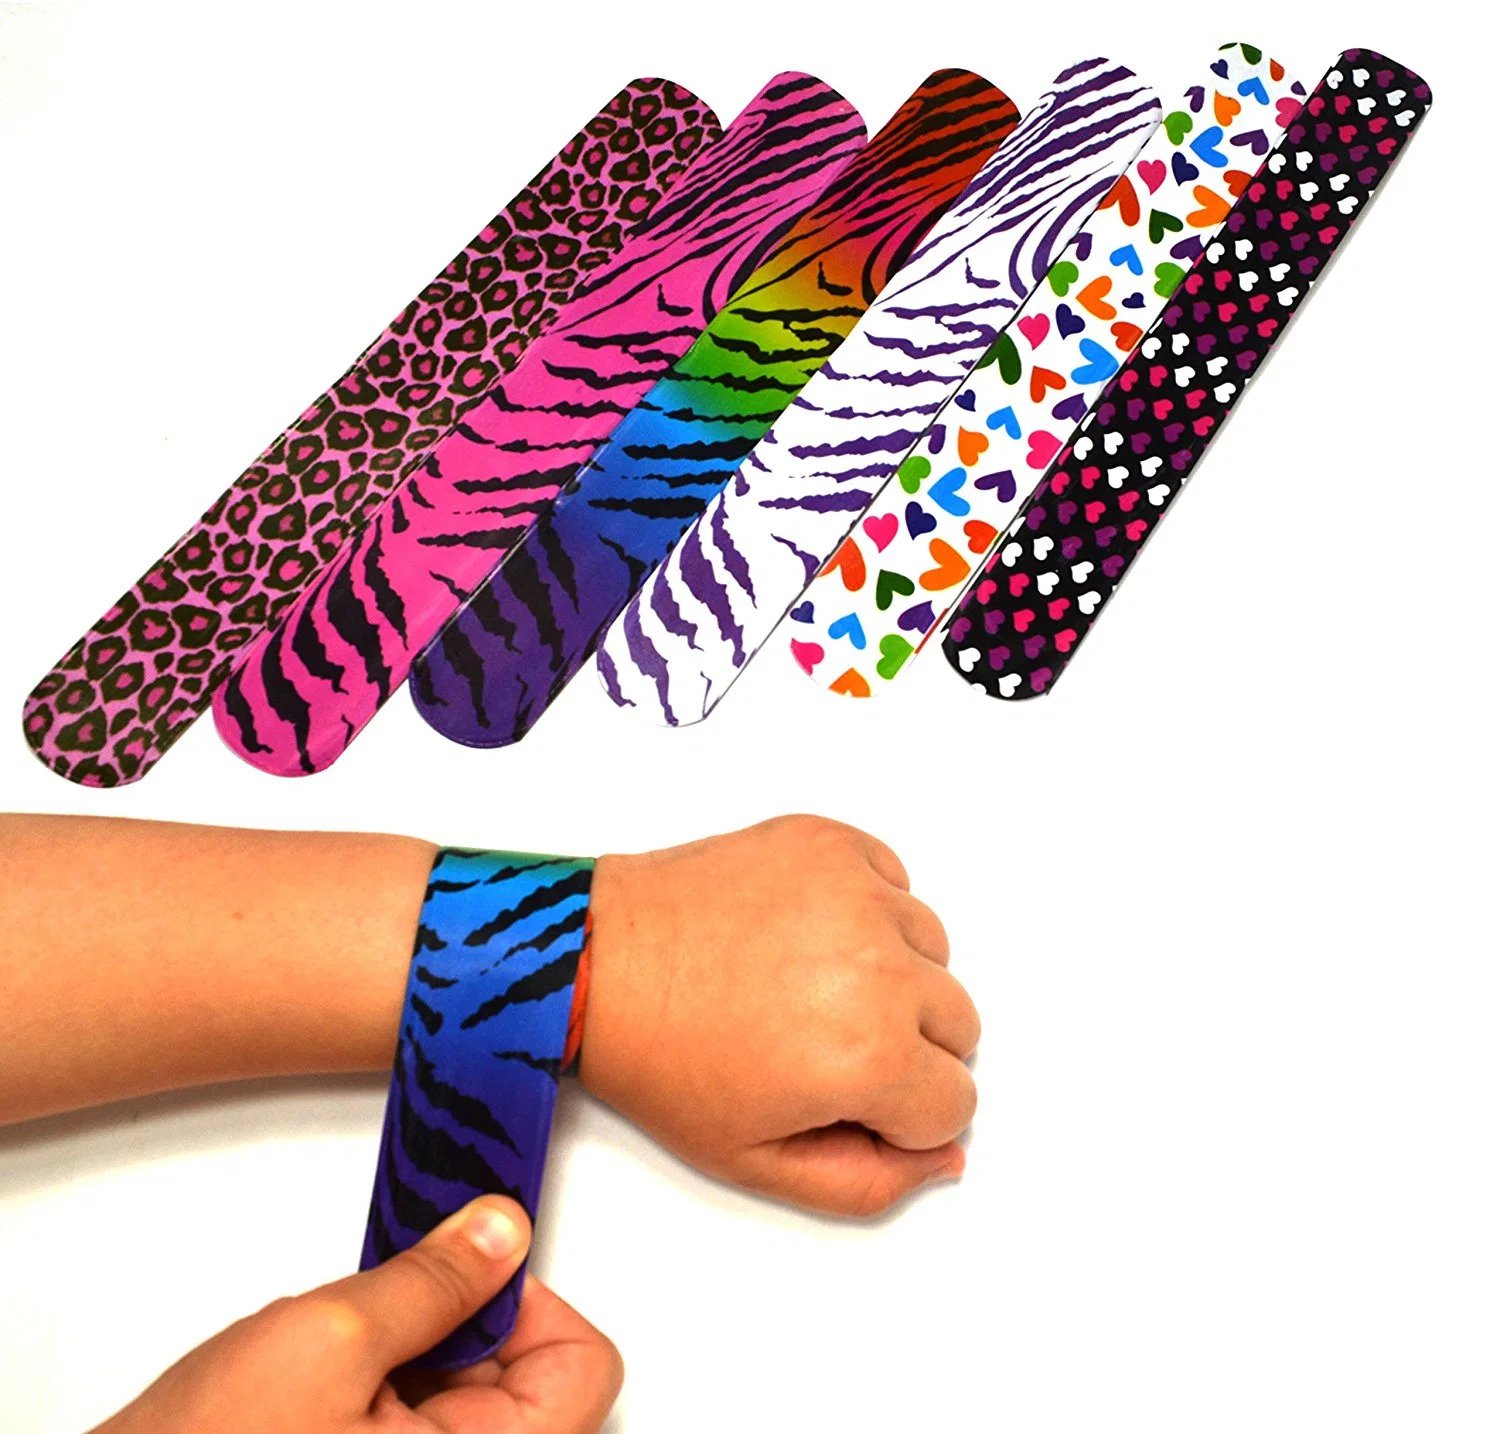 How To Make A Slap Bracelet Without A Measuring Tape